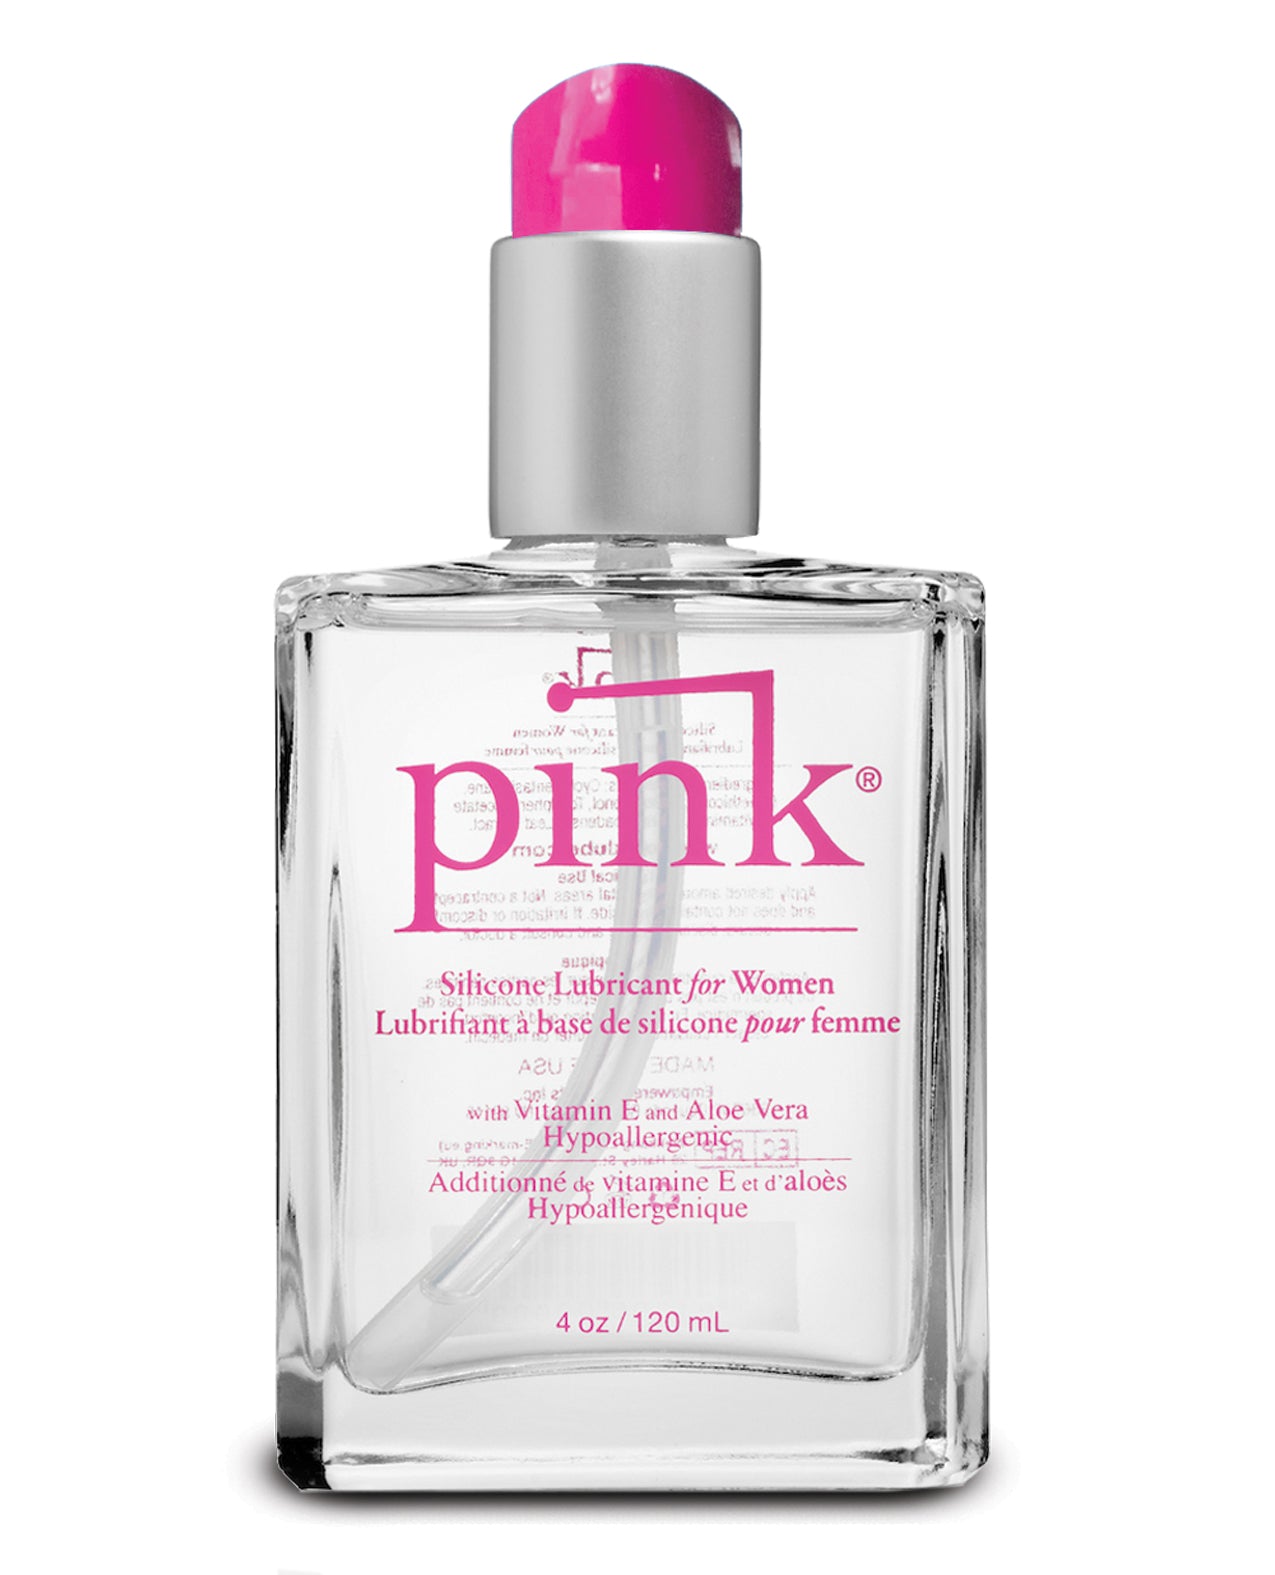 Pink Silicone Lube - 4 oz Glass Bottle